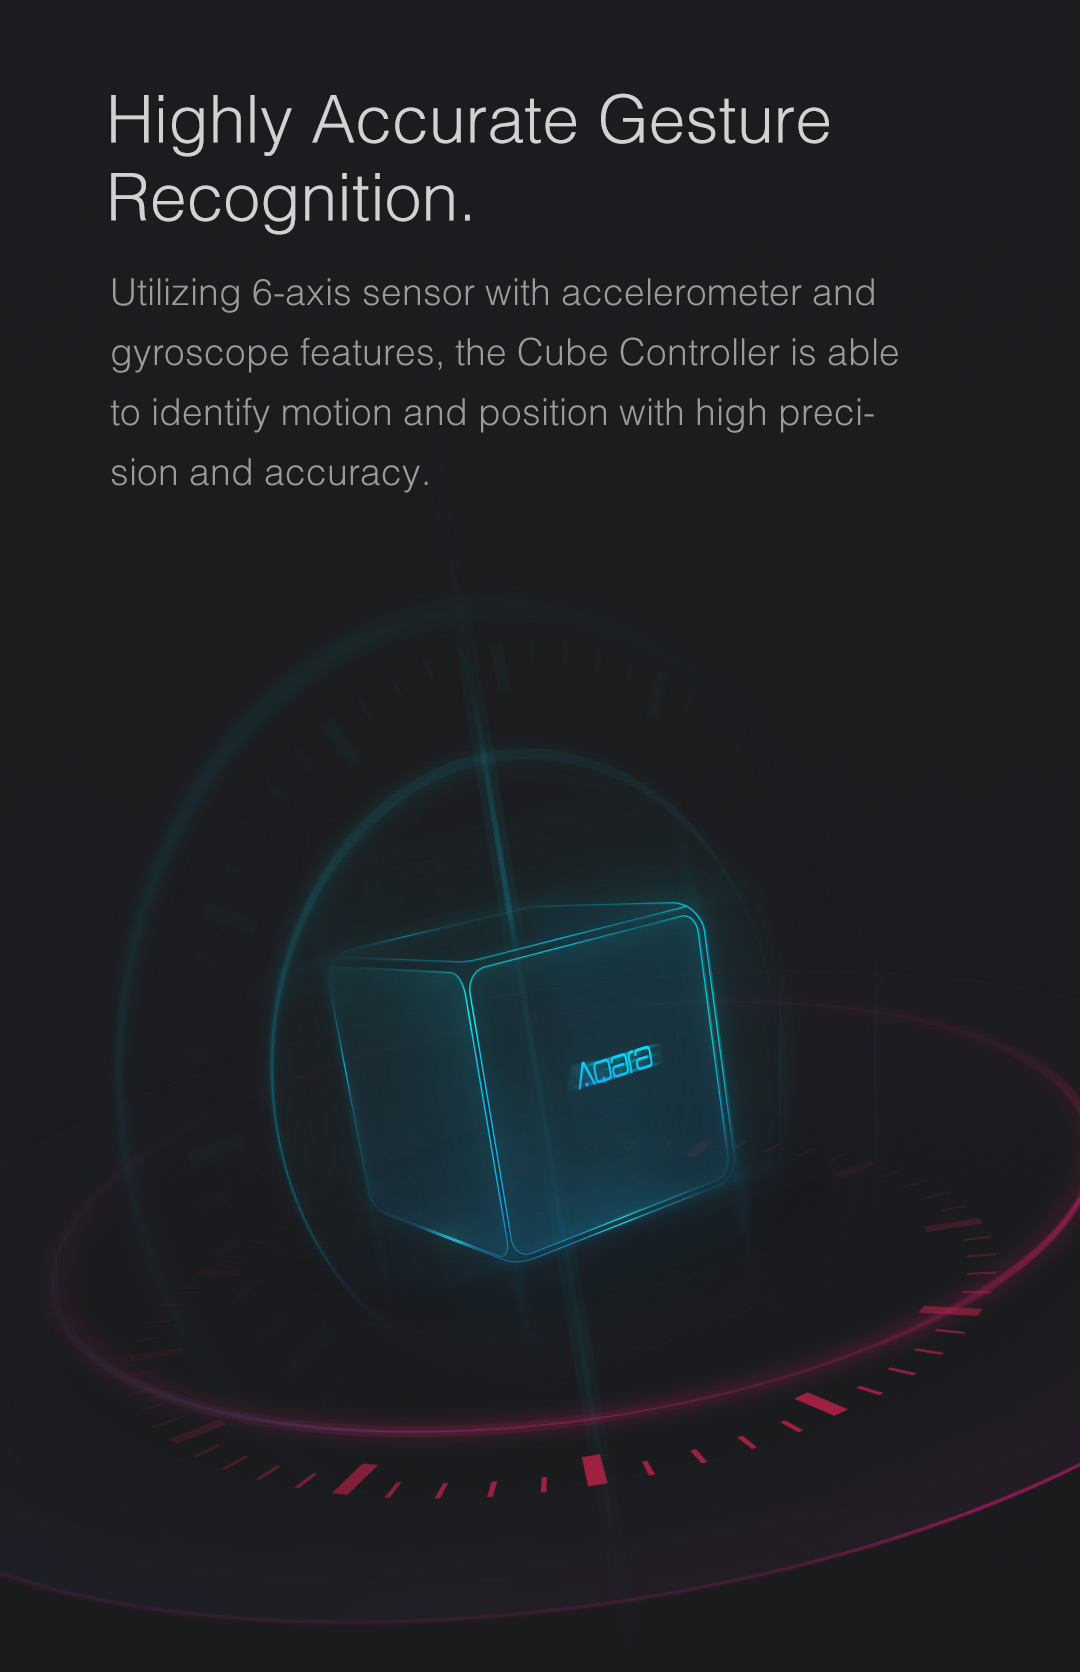 Aqara Cube Controller is able to identify motion and position with high precision and accuracy